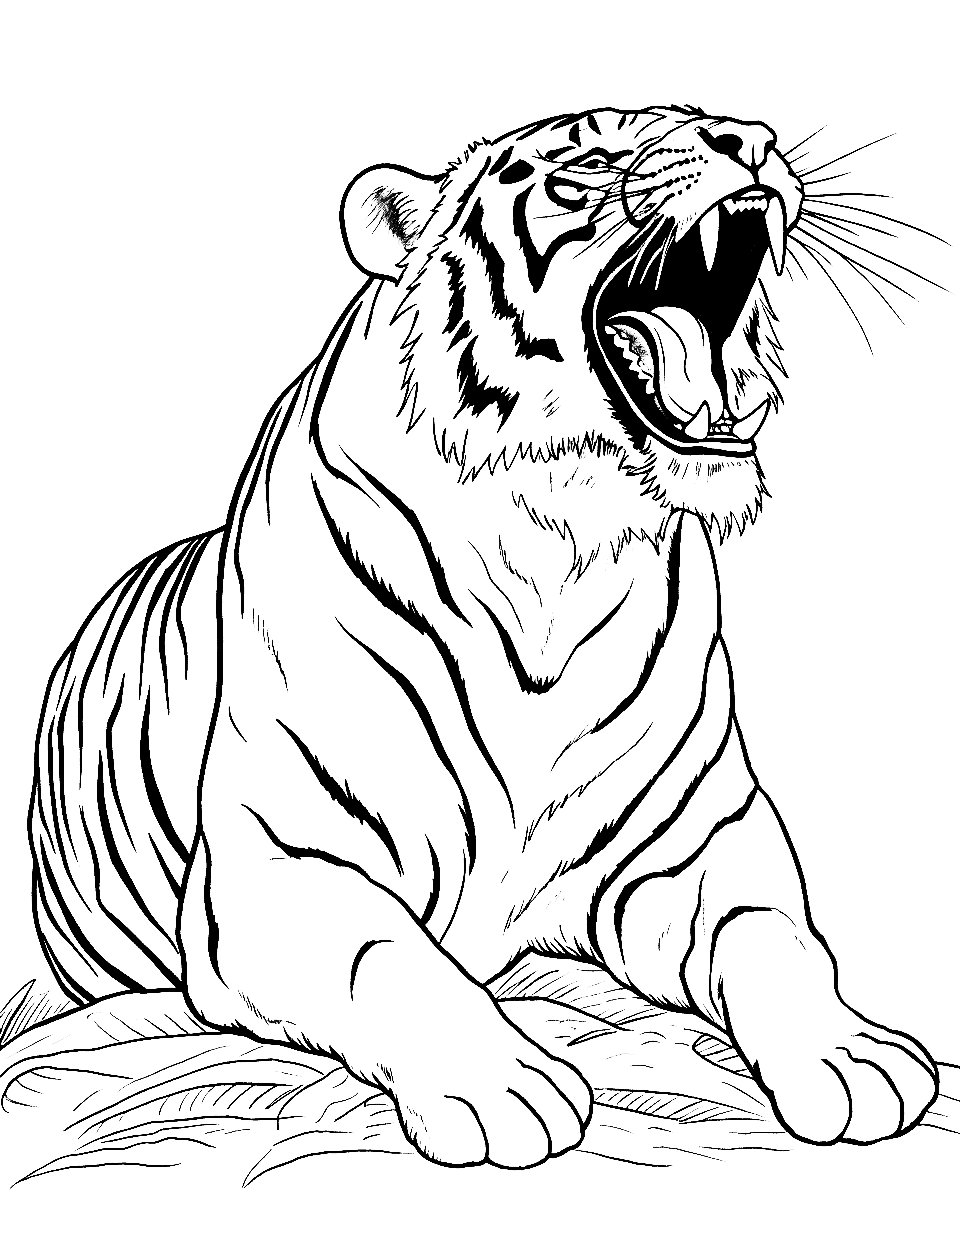 Yawning Morning Tiger Coloring Page - A tiger yawning widely as it wakes from a nap.